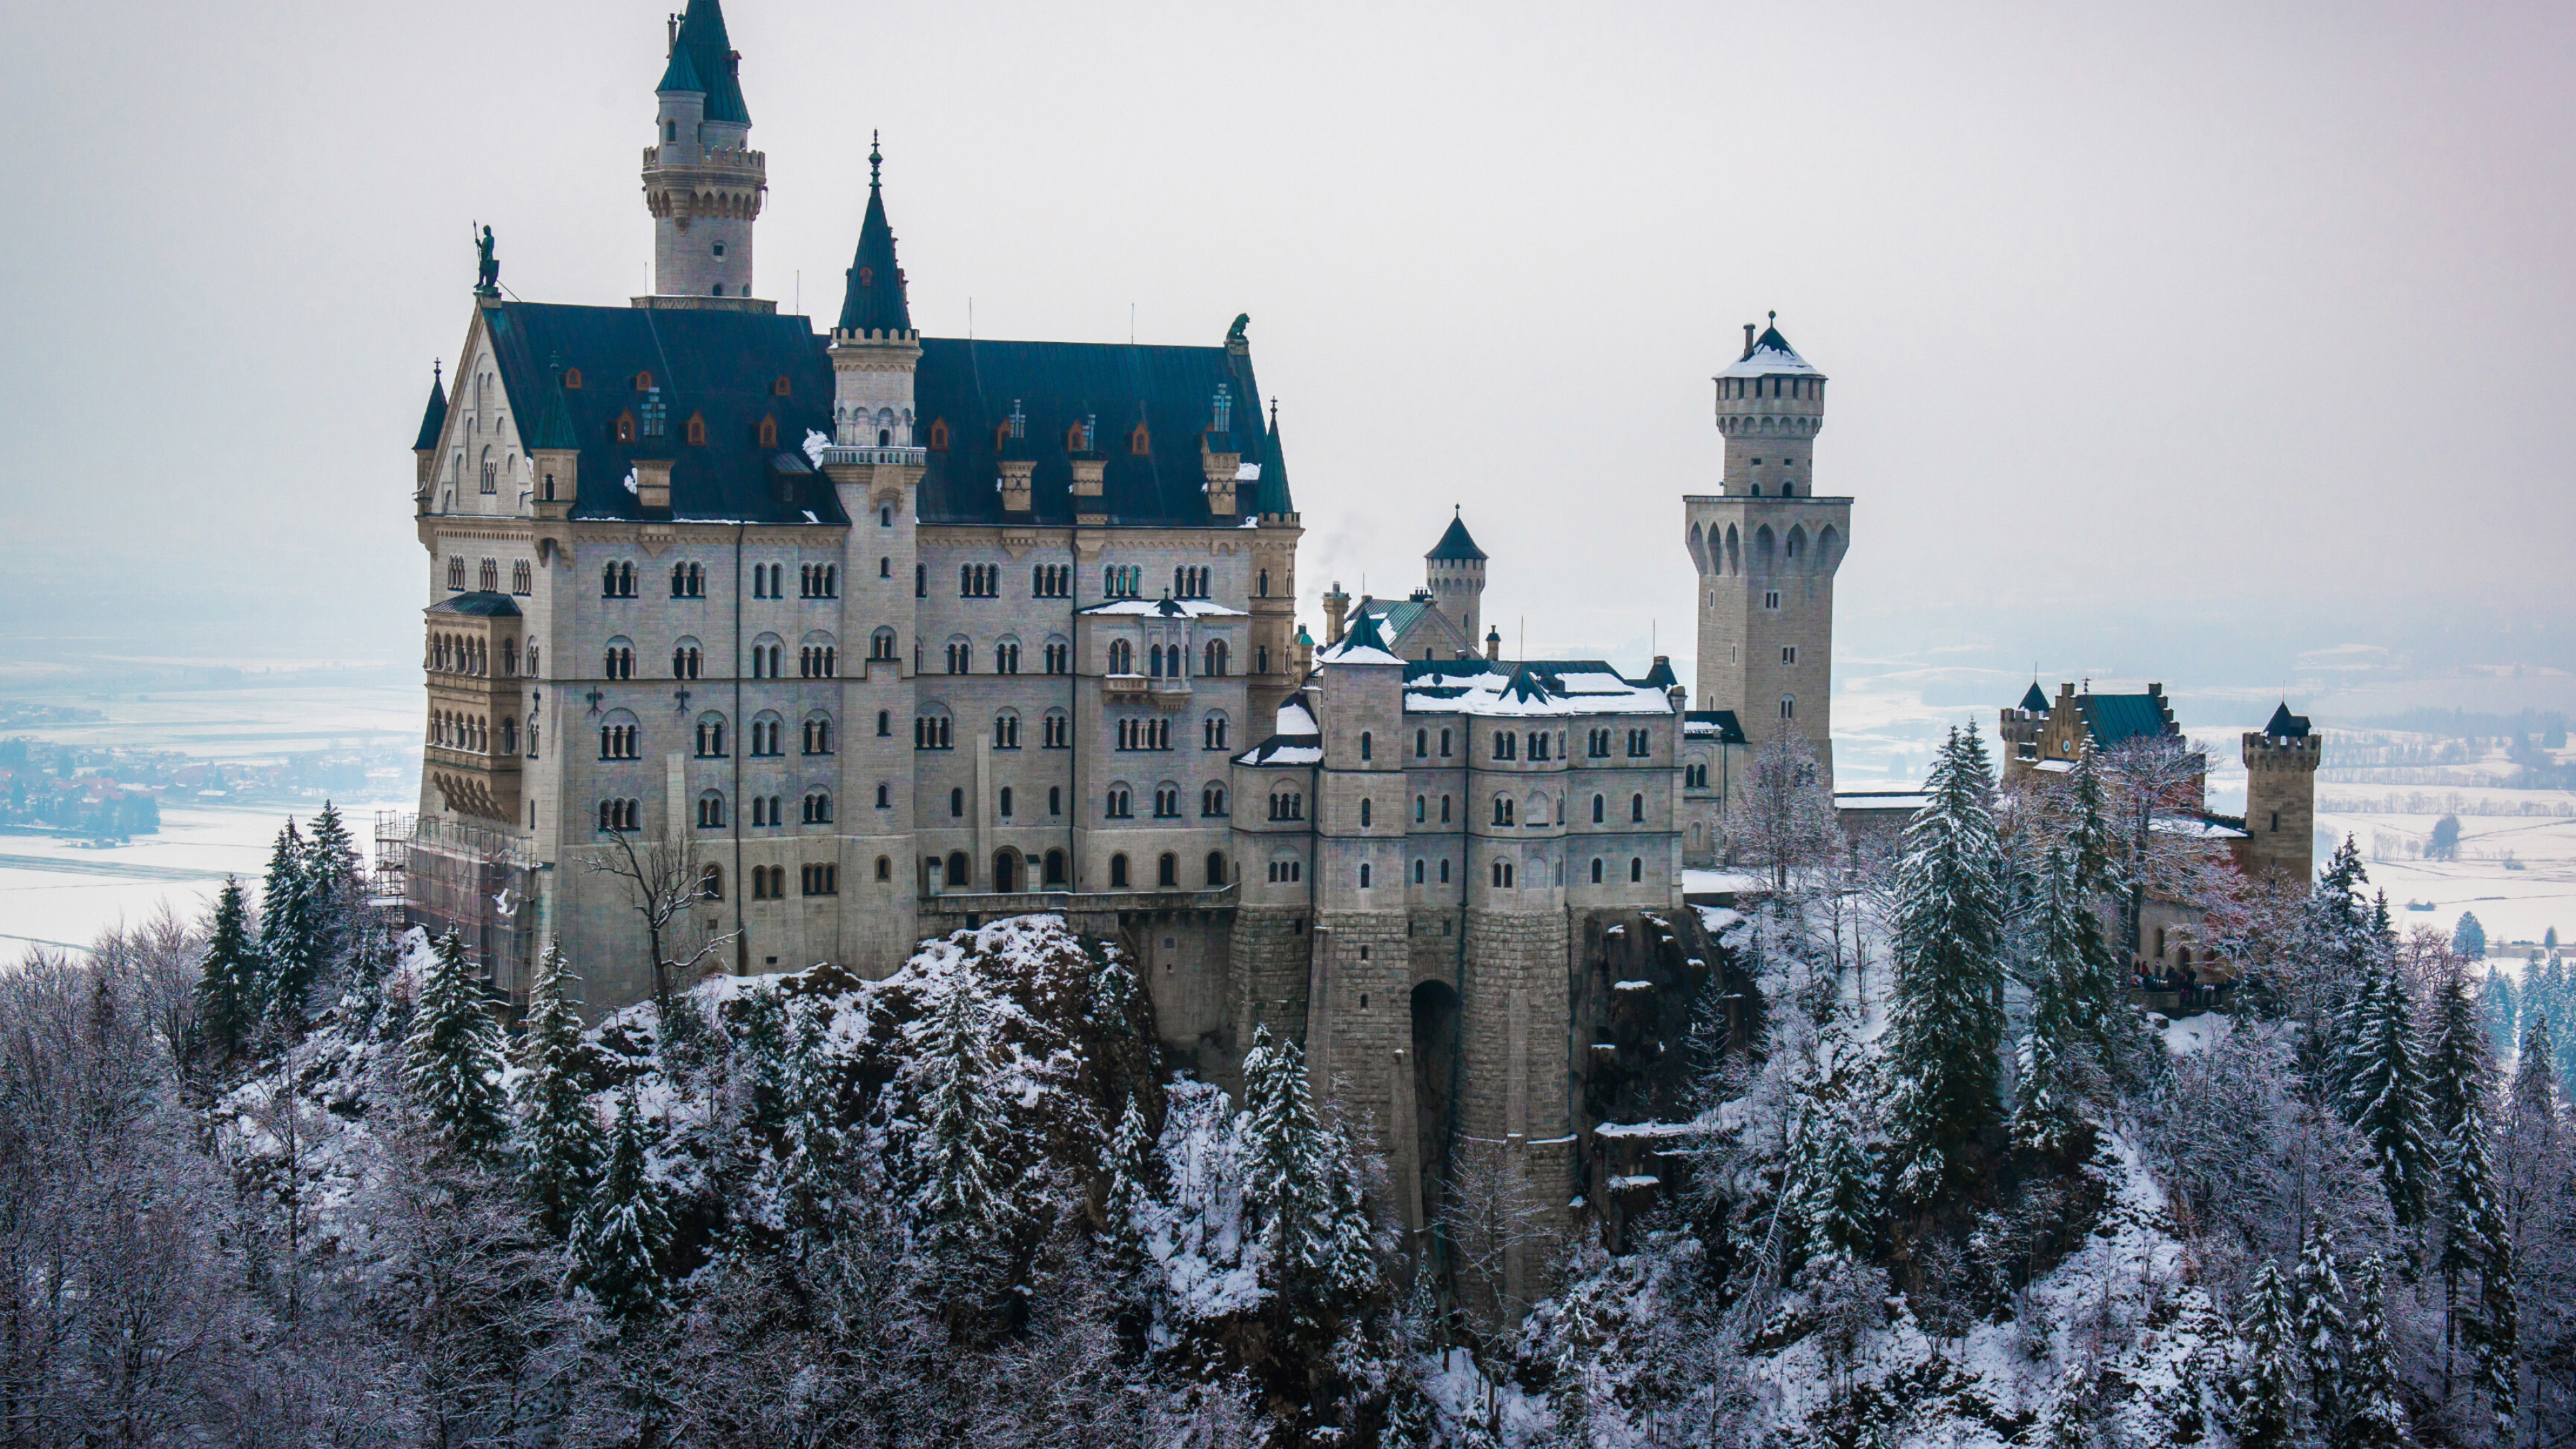 Neuschwanstein Castle: A palace built atop a rock ledge over the Pollat Gorge, Germany. 3840x2160 4K Background.